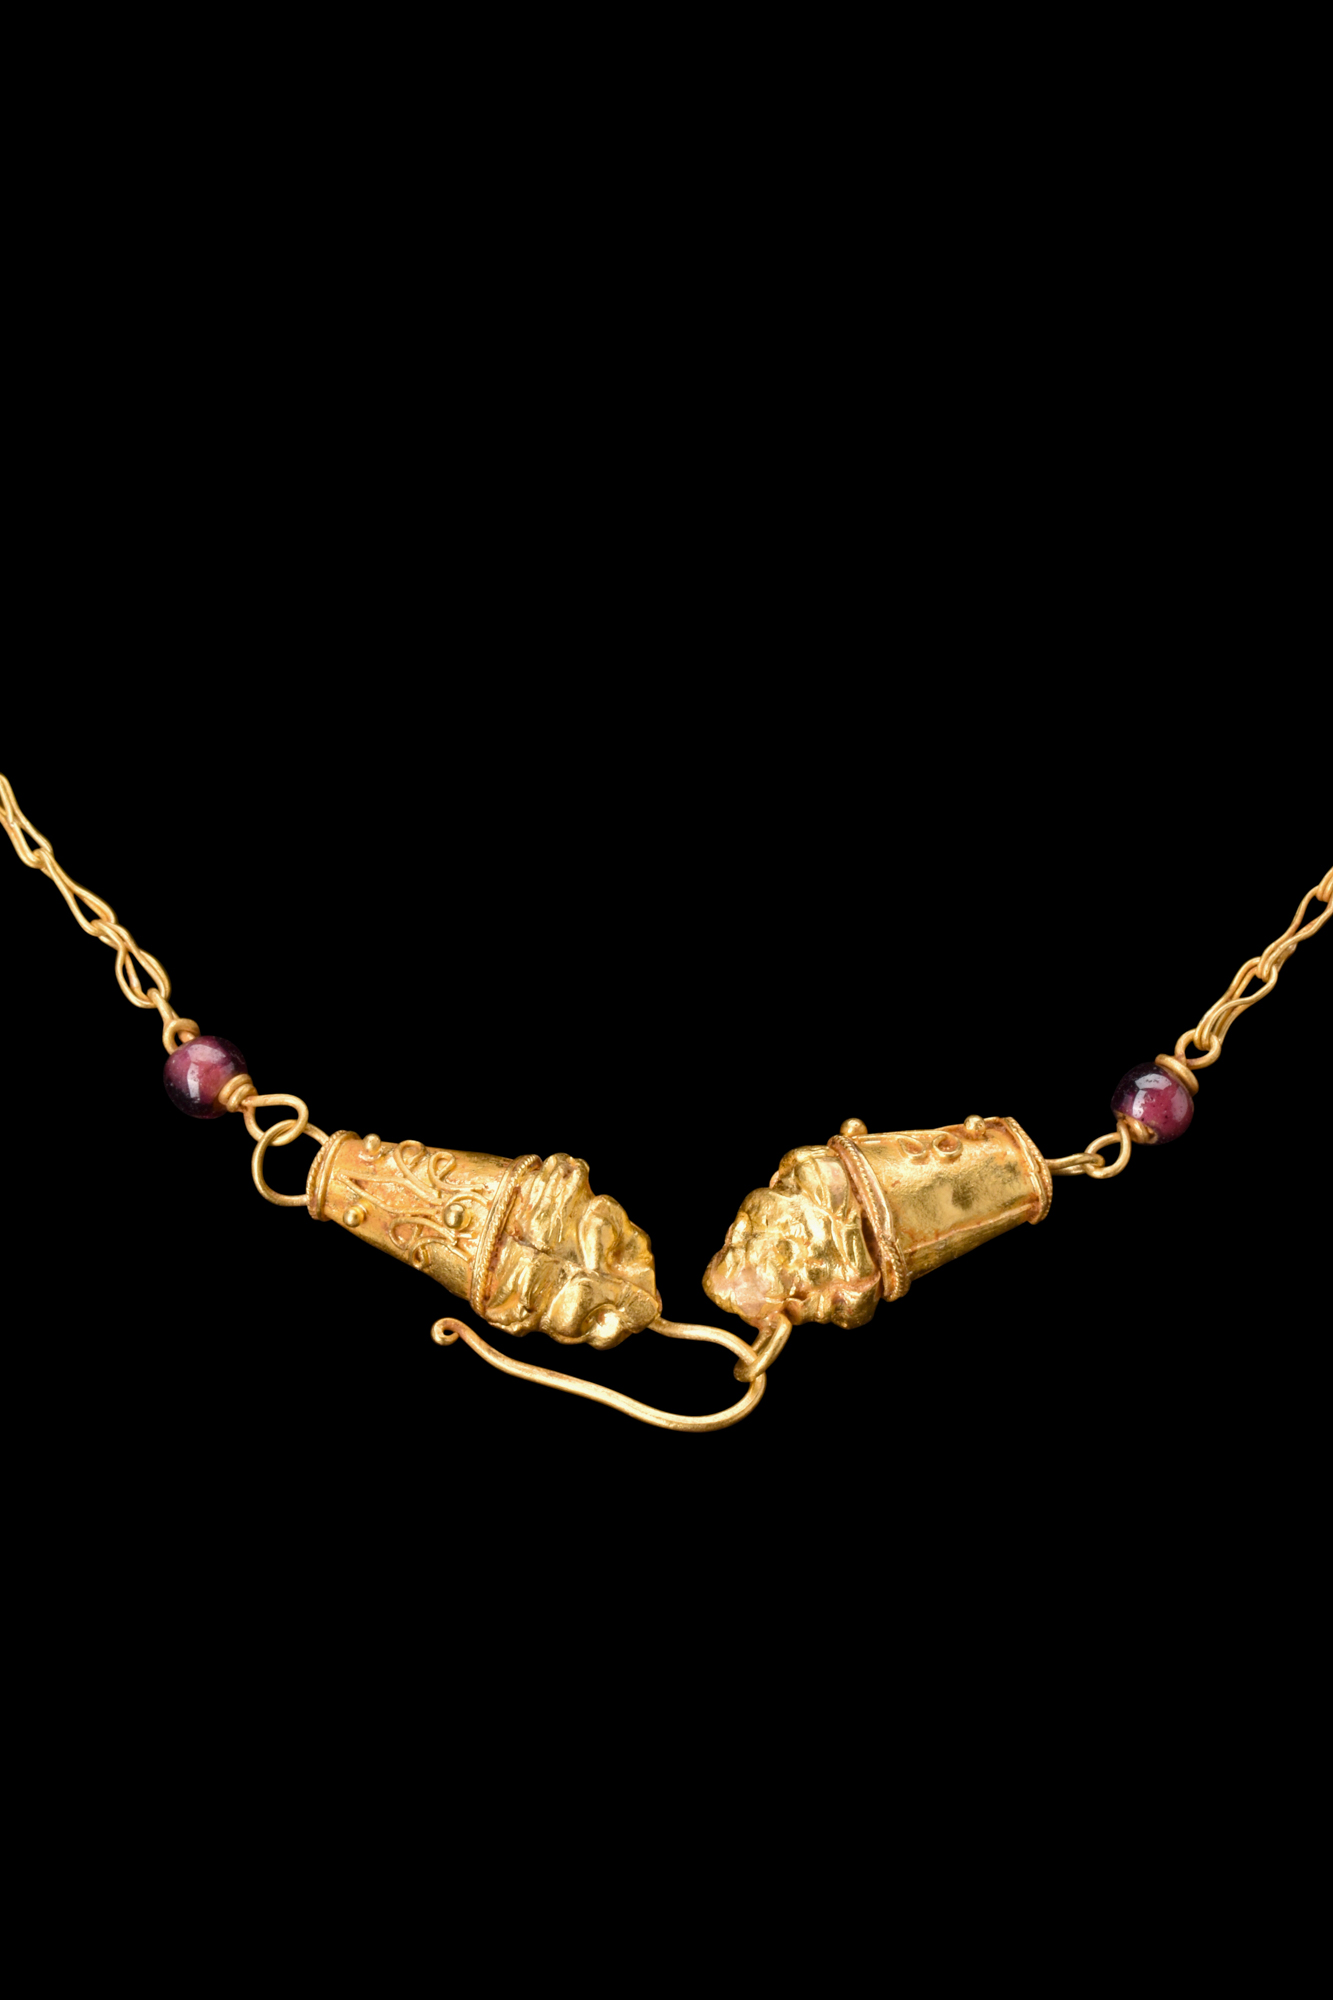 HELLENISTIC GOLD CHAIN WITH LION HEAD FINIALS - Image 7 of 10